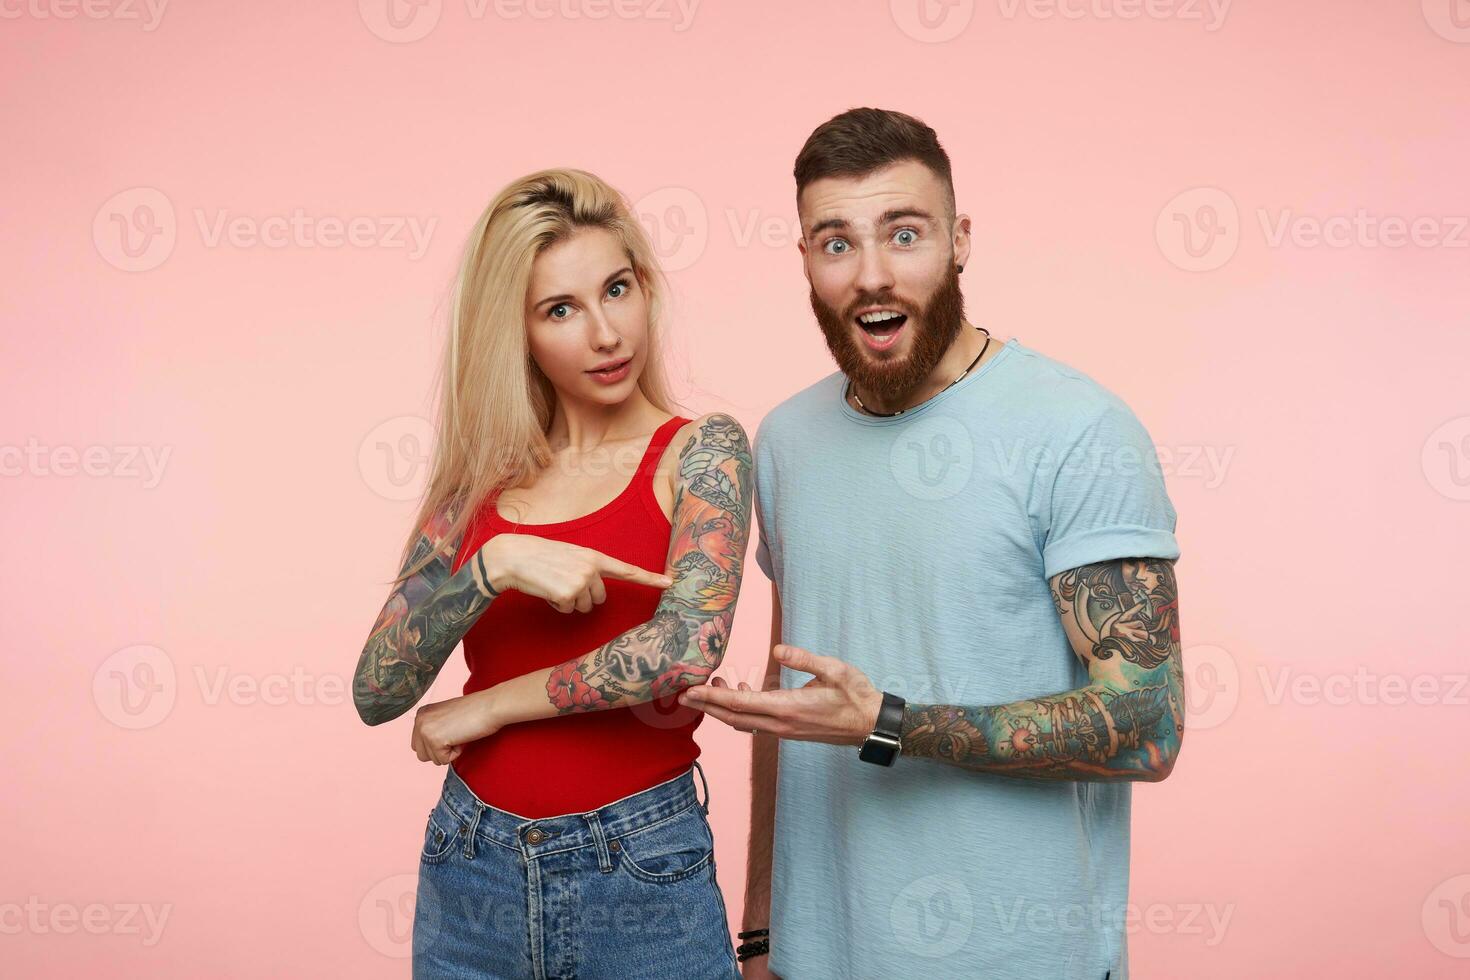 Indoor photo of attractive couple dressed in casual clothes looking surprisedly at camera and keeping hands raised, standing against pink background